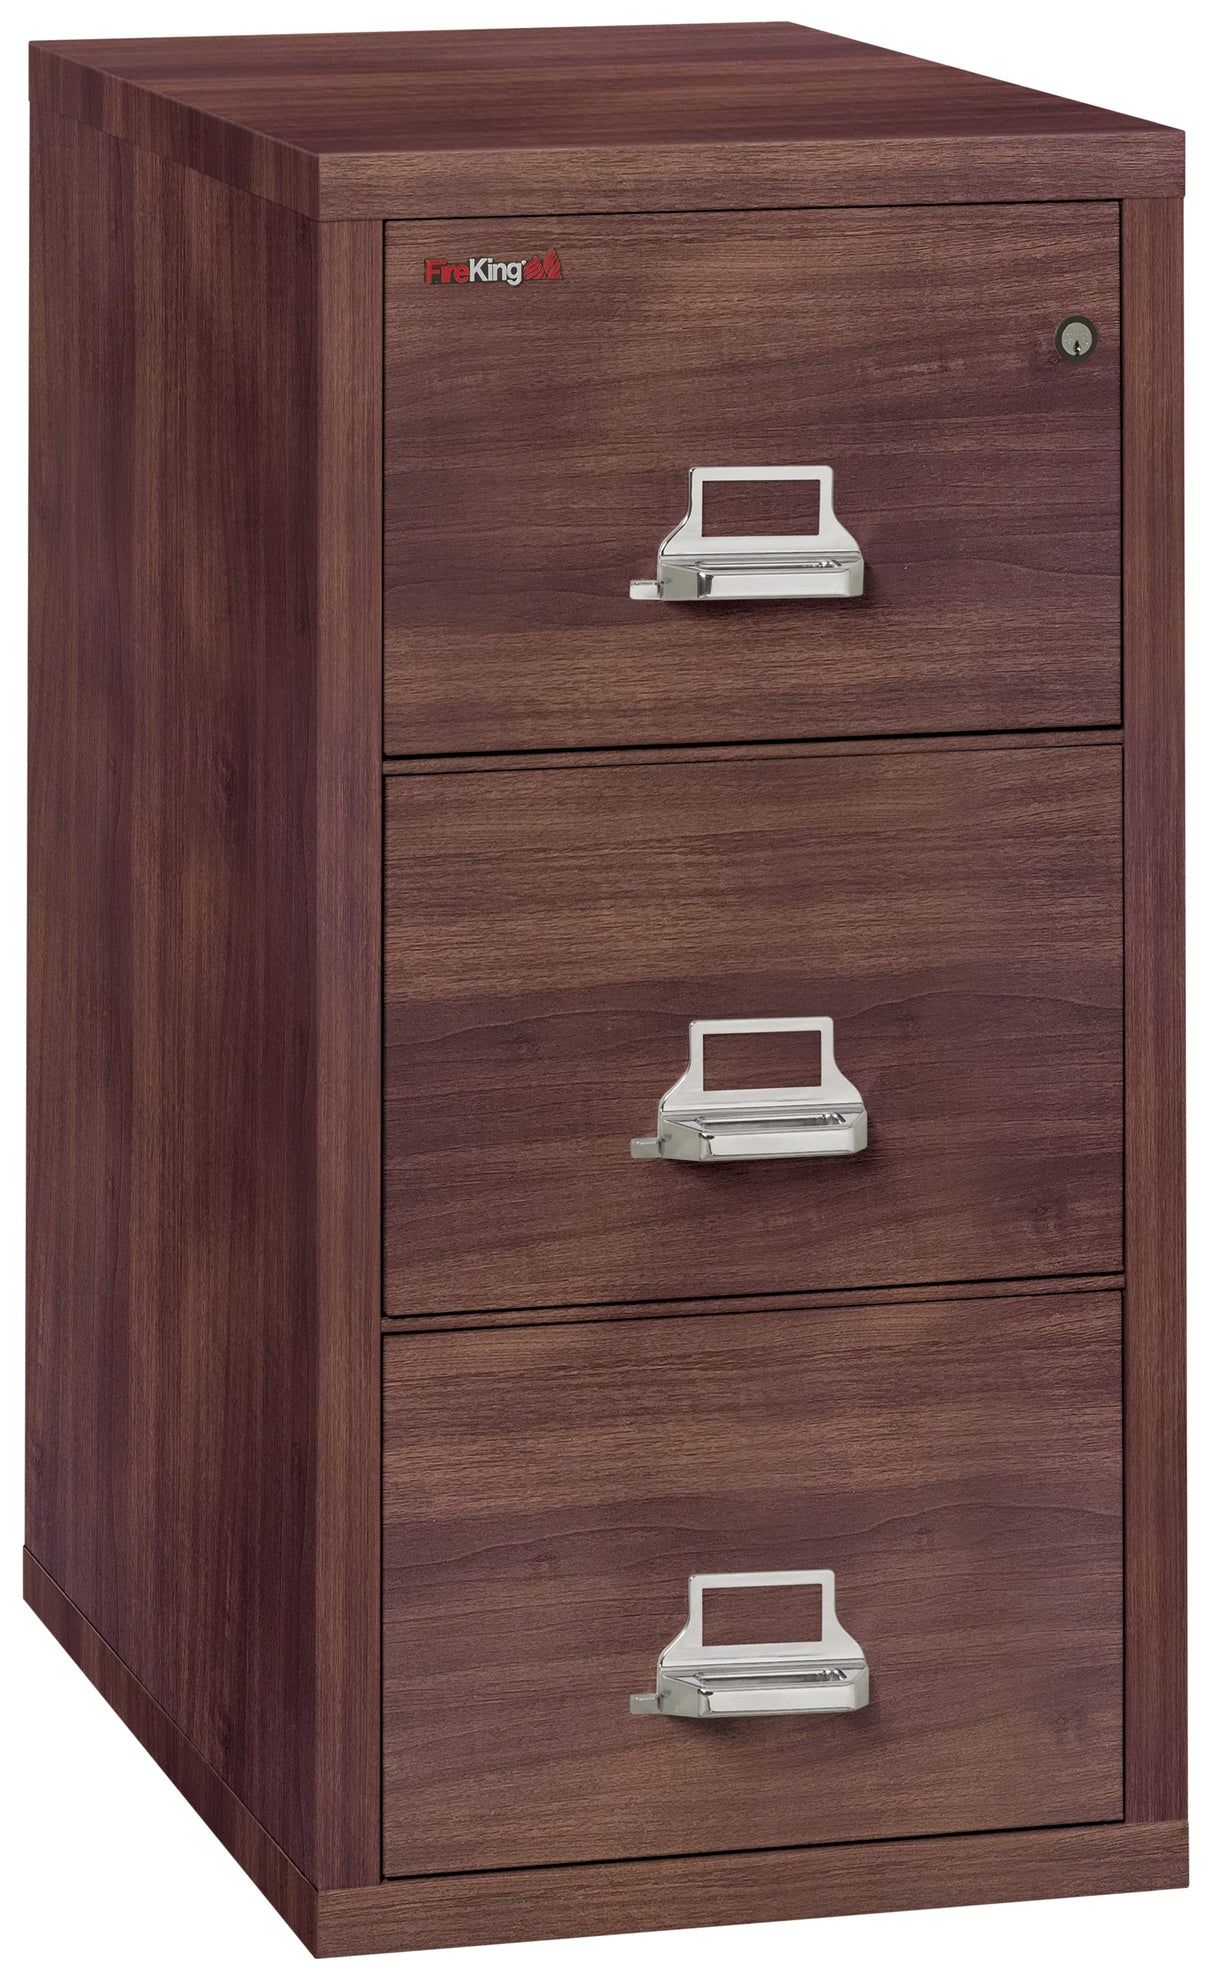 FireKing Designer Series 31" Vertical File Cabinet (1-Hour Fire-Rated & High Security)